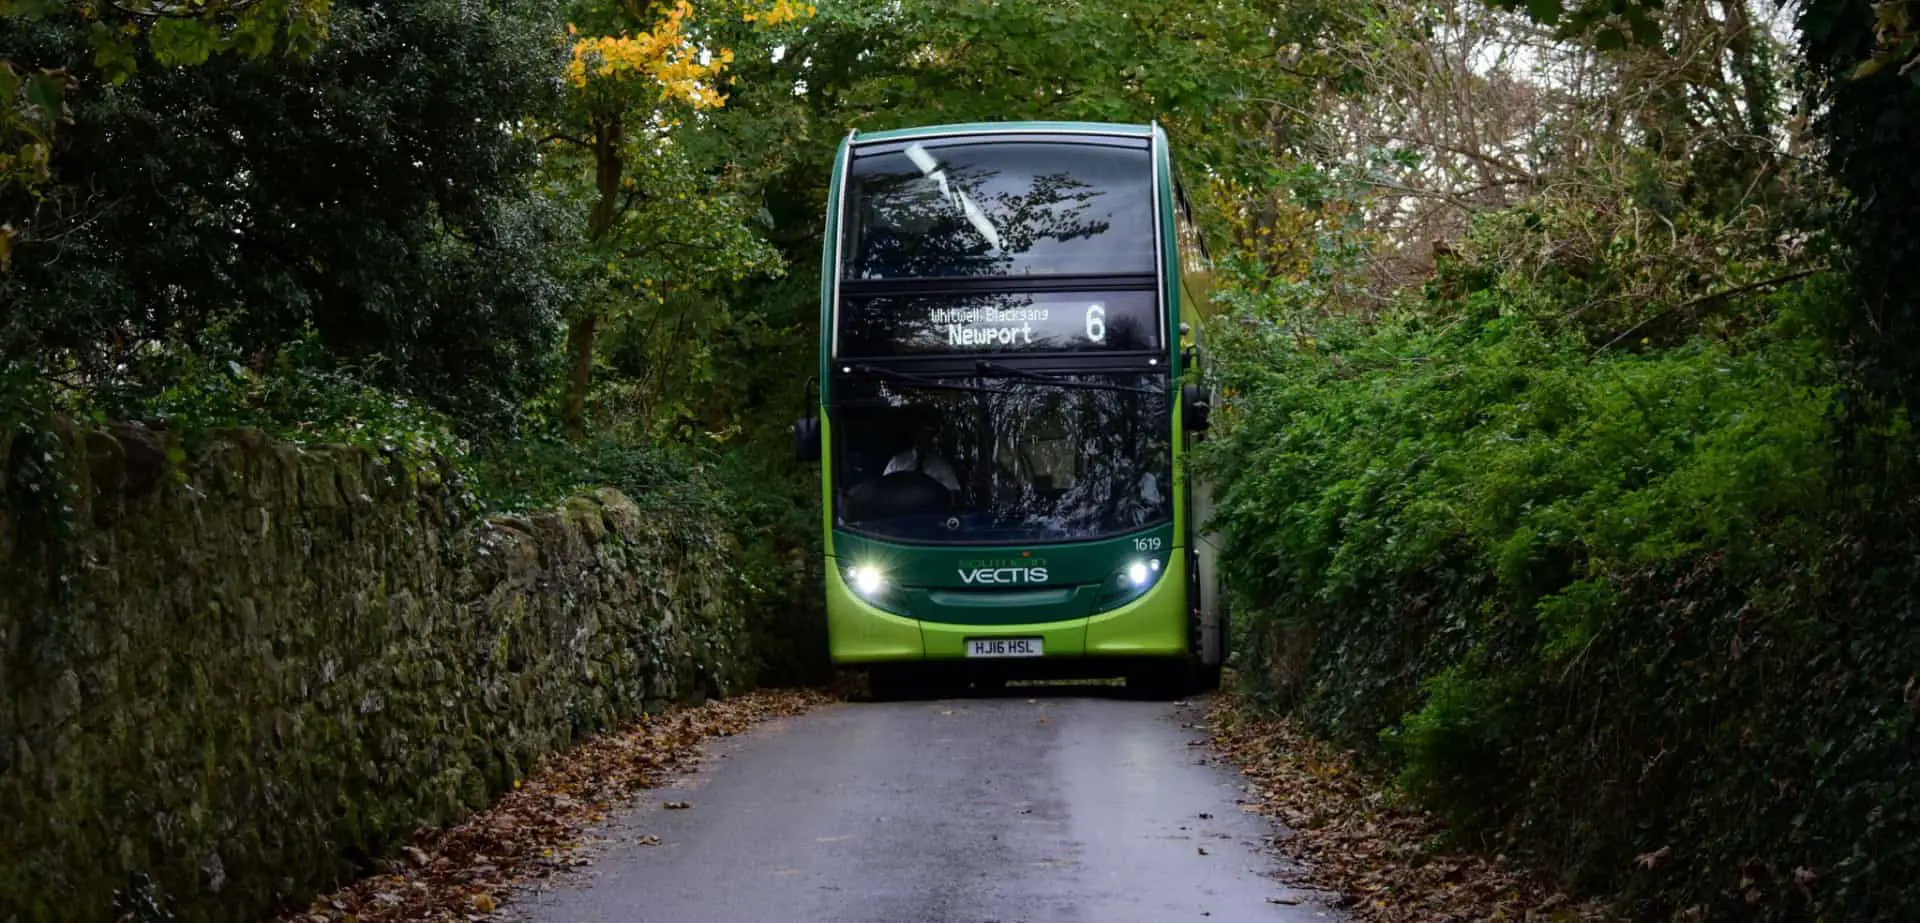 Route 6 bus - Southern Vectis